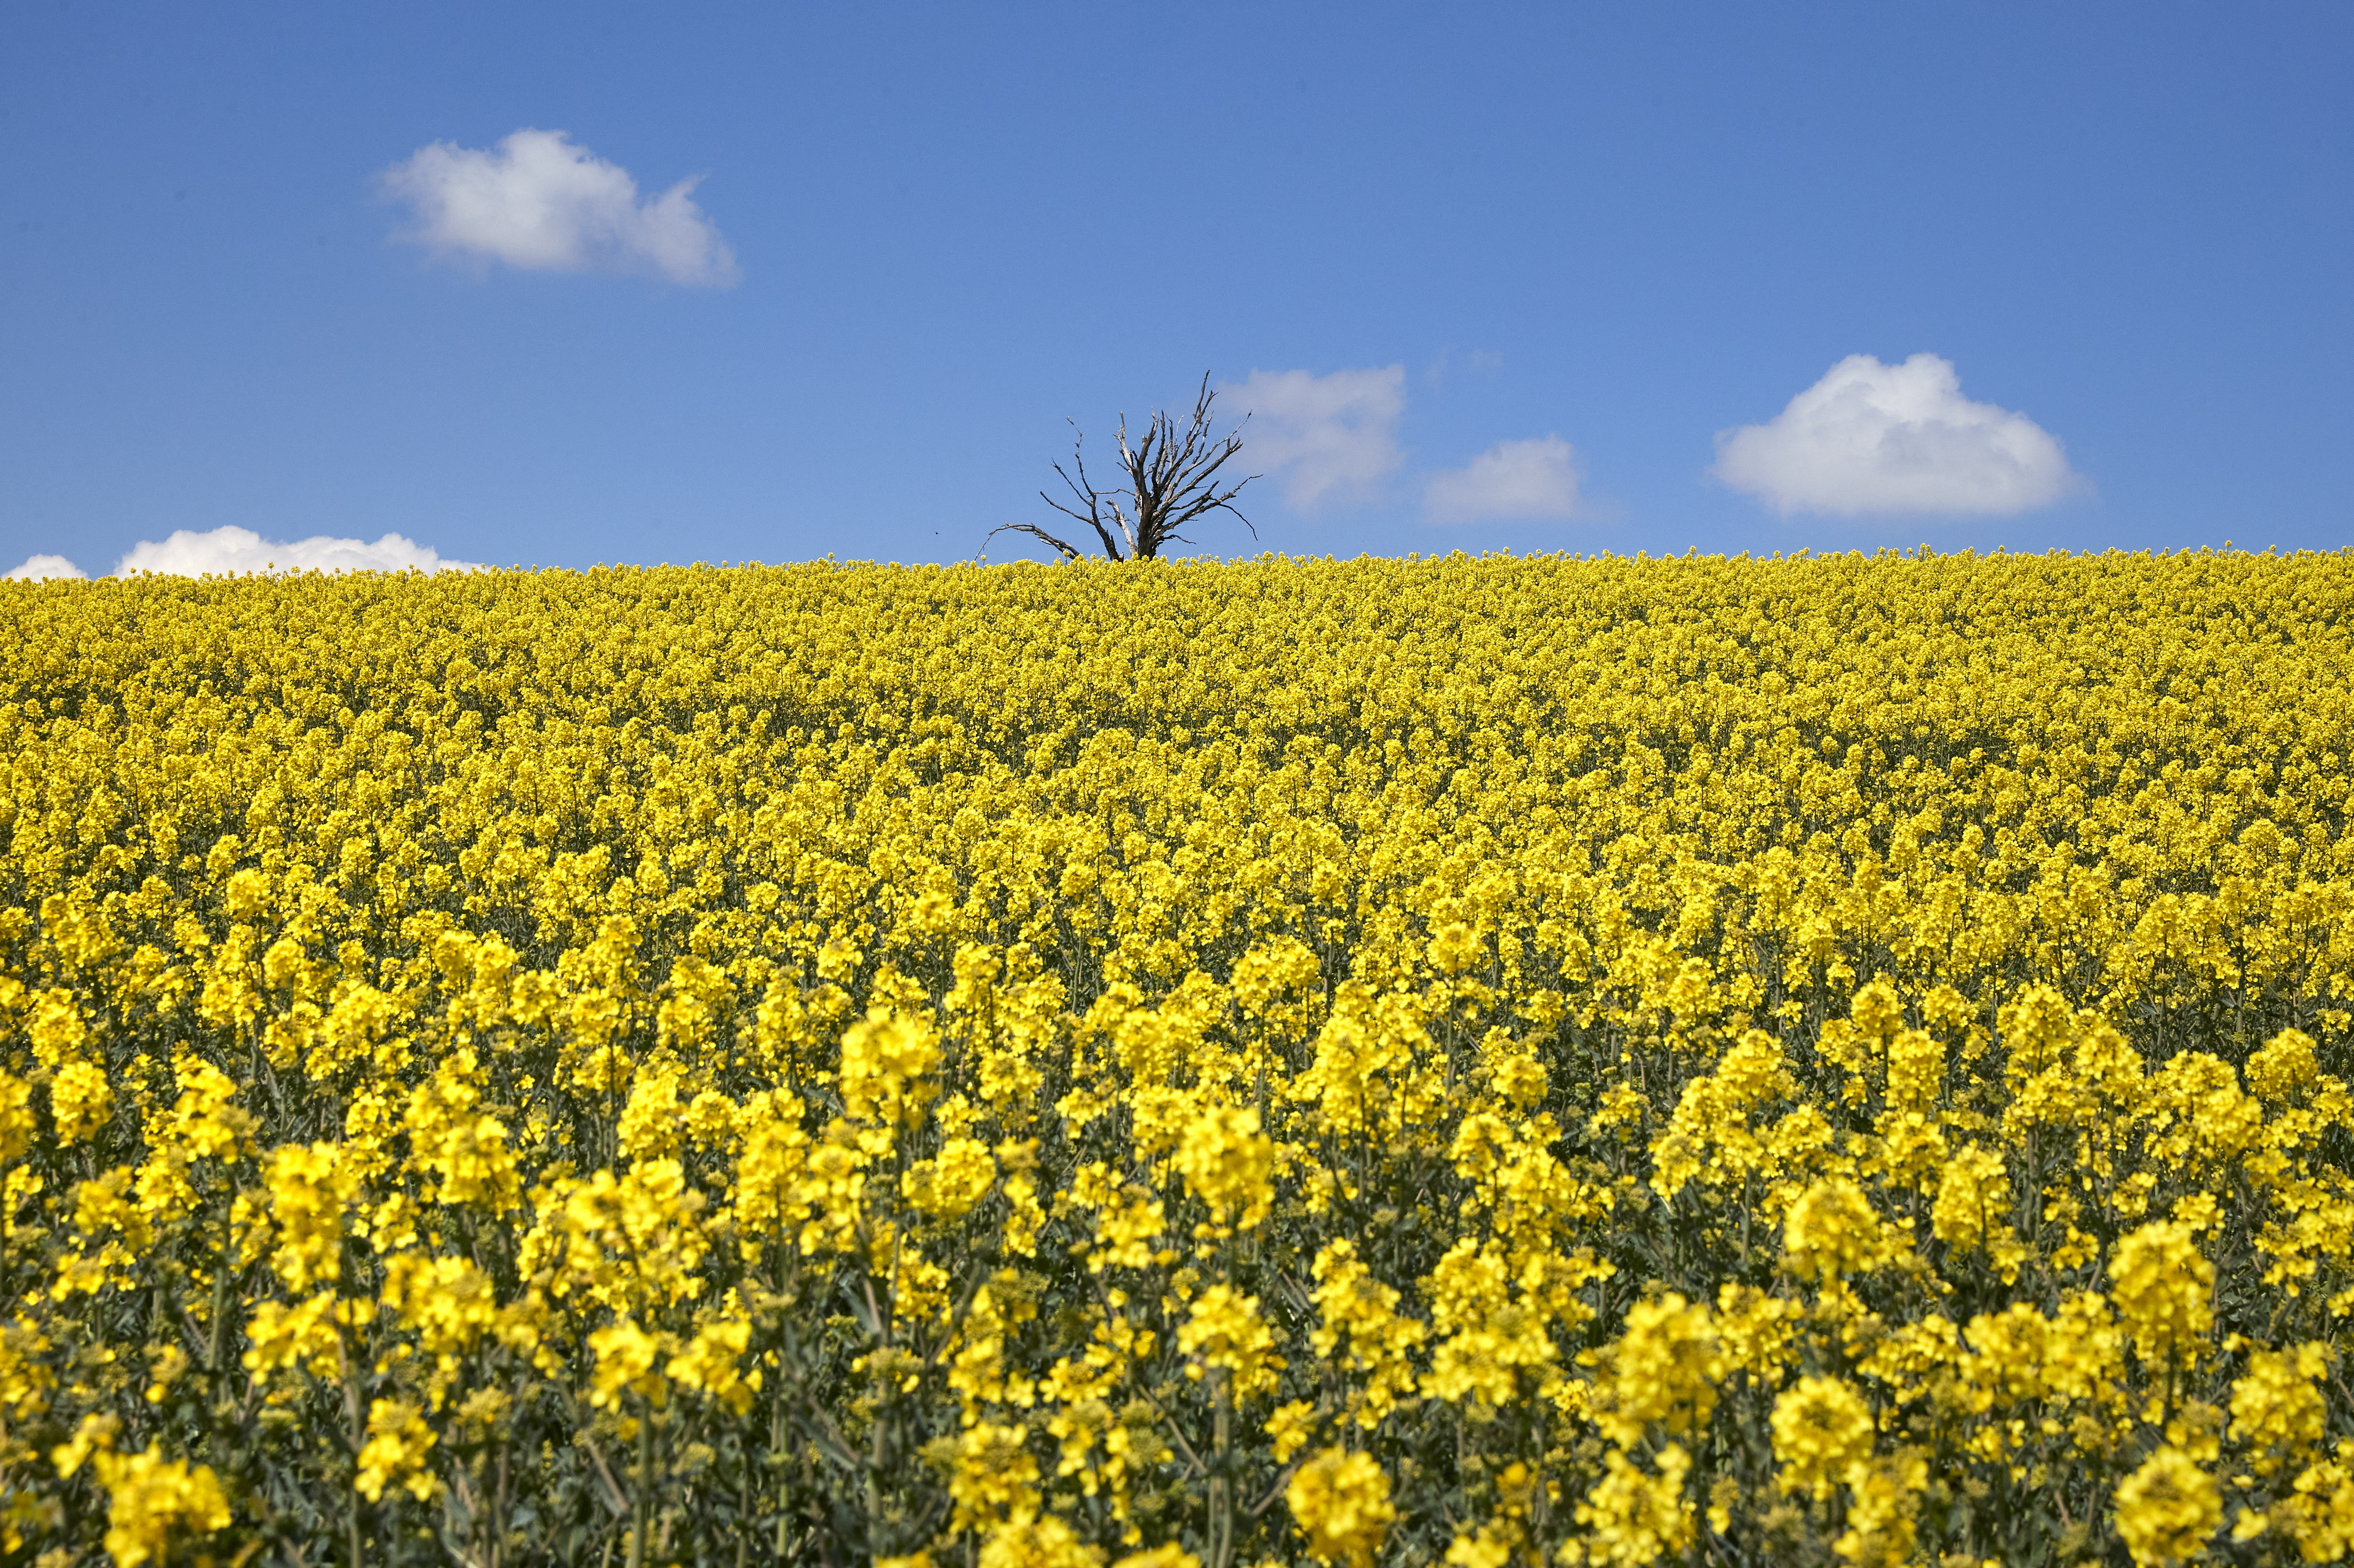 A tree is pictured behind a rapeseed field in Mex